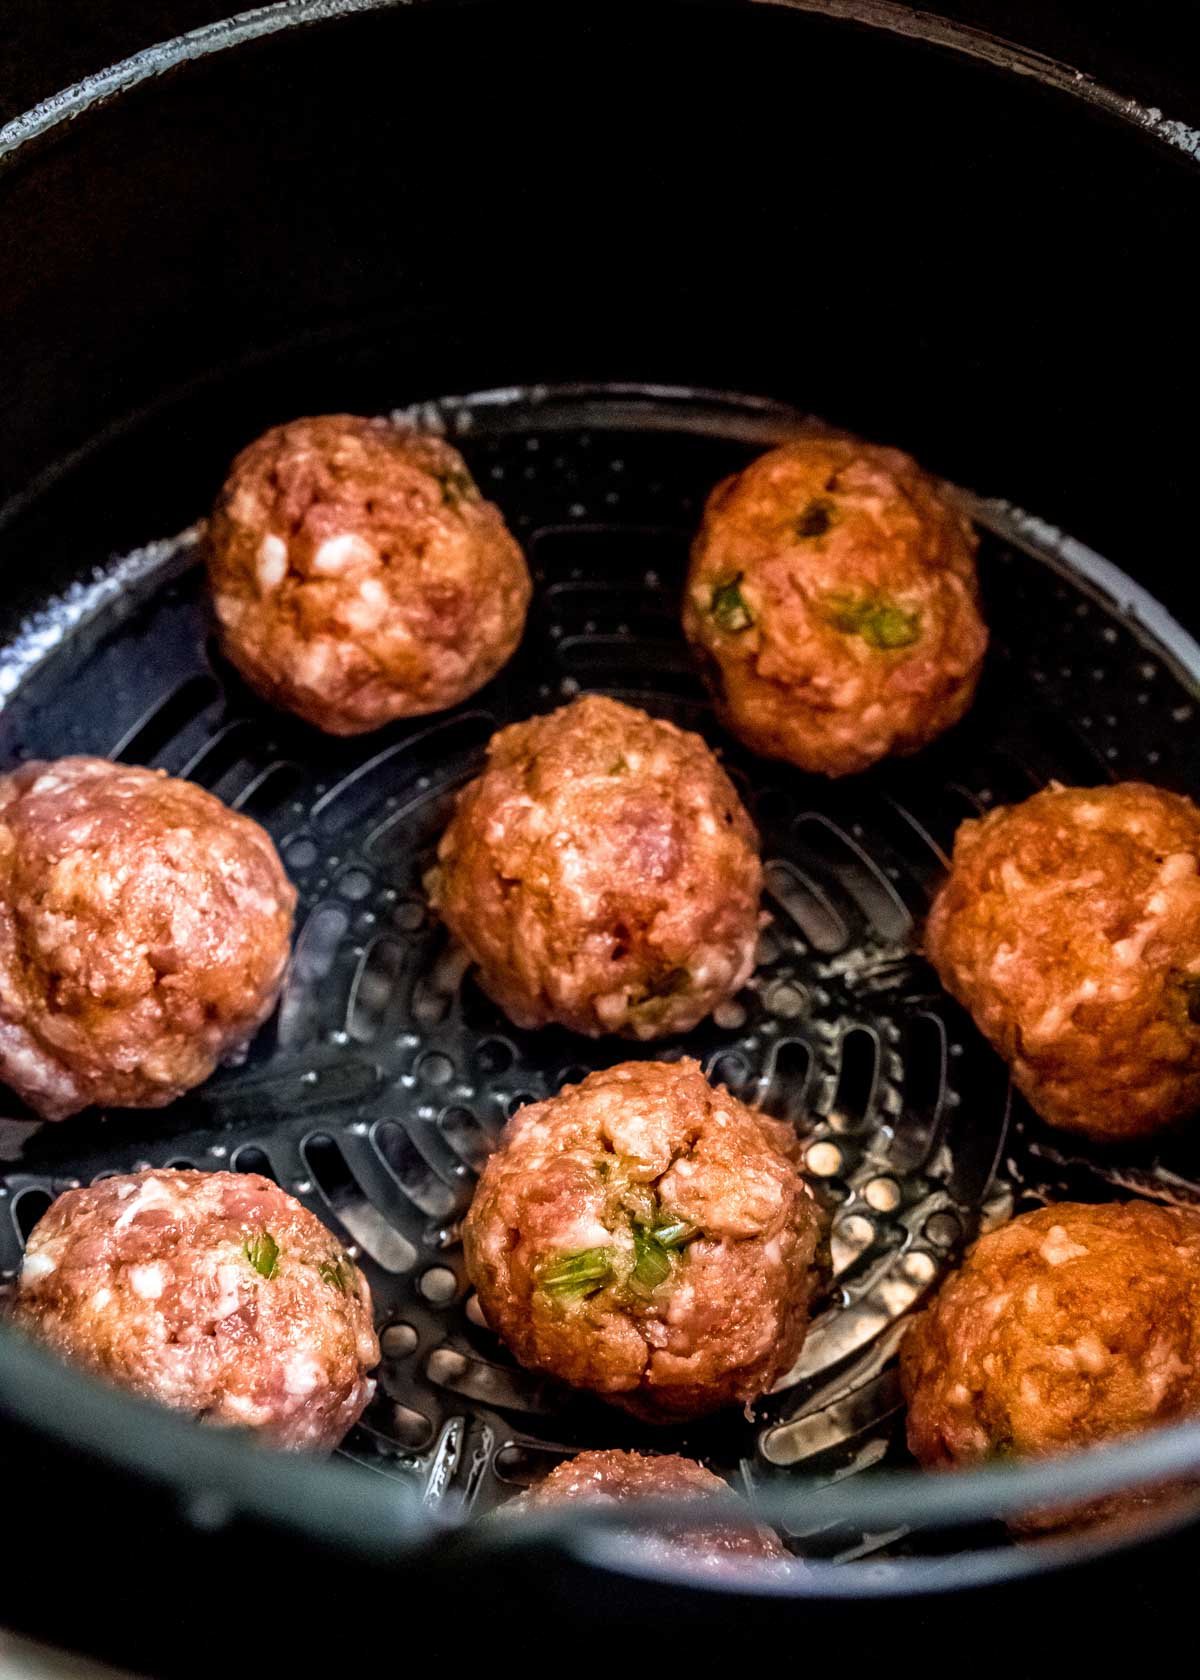 place meatballs in the air fryer with about 1" of space between each